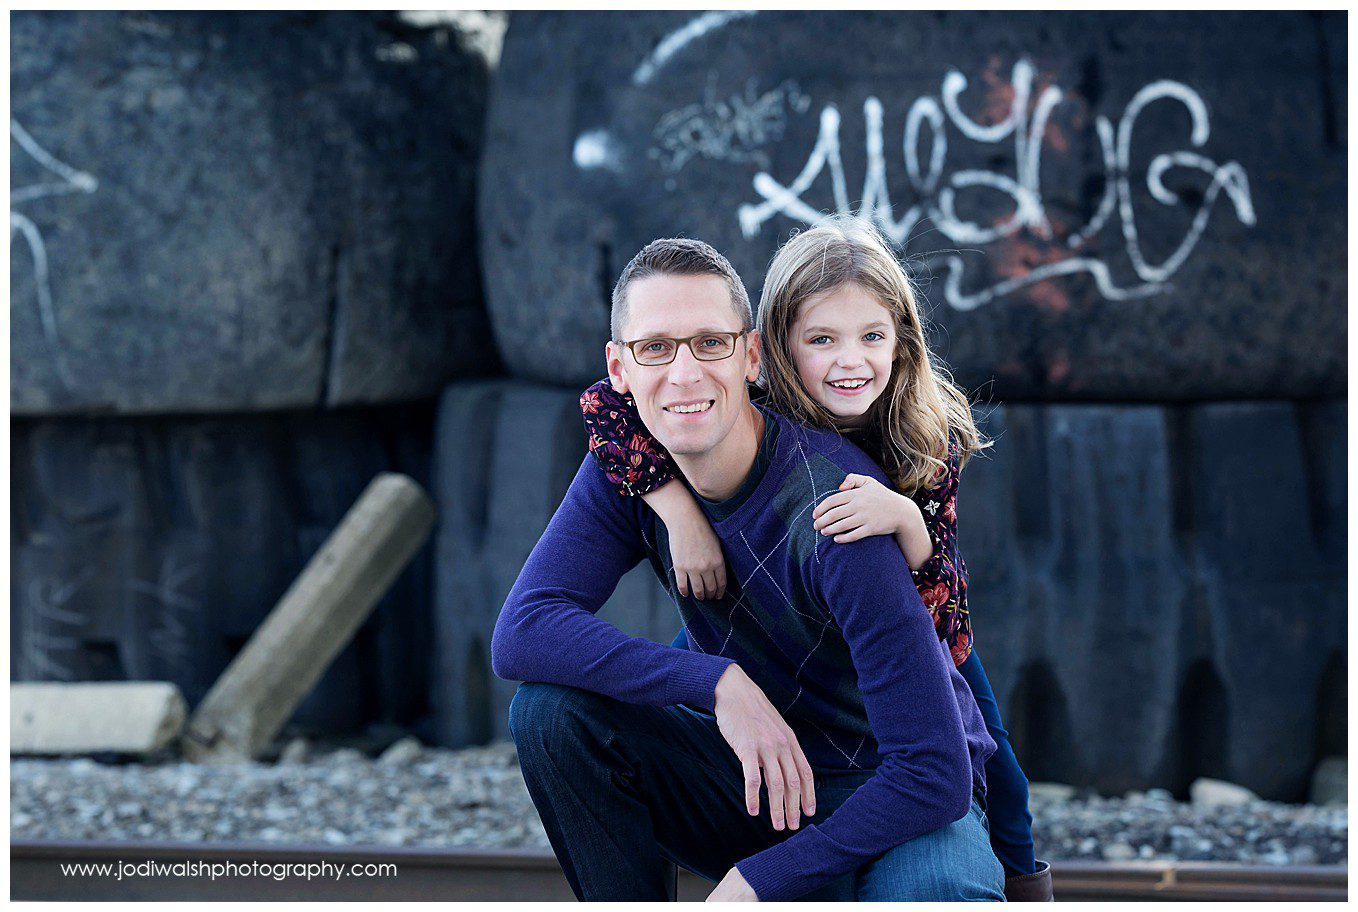 image of a dad kneeling down with his elbows on his knees and his daughter standing behind him, her arms around his shoulders. They're both smiling. They're posed in front of large industrial tires with graffiti on them. 